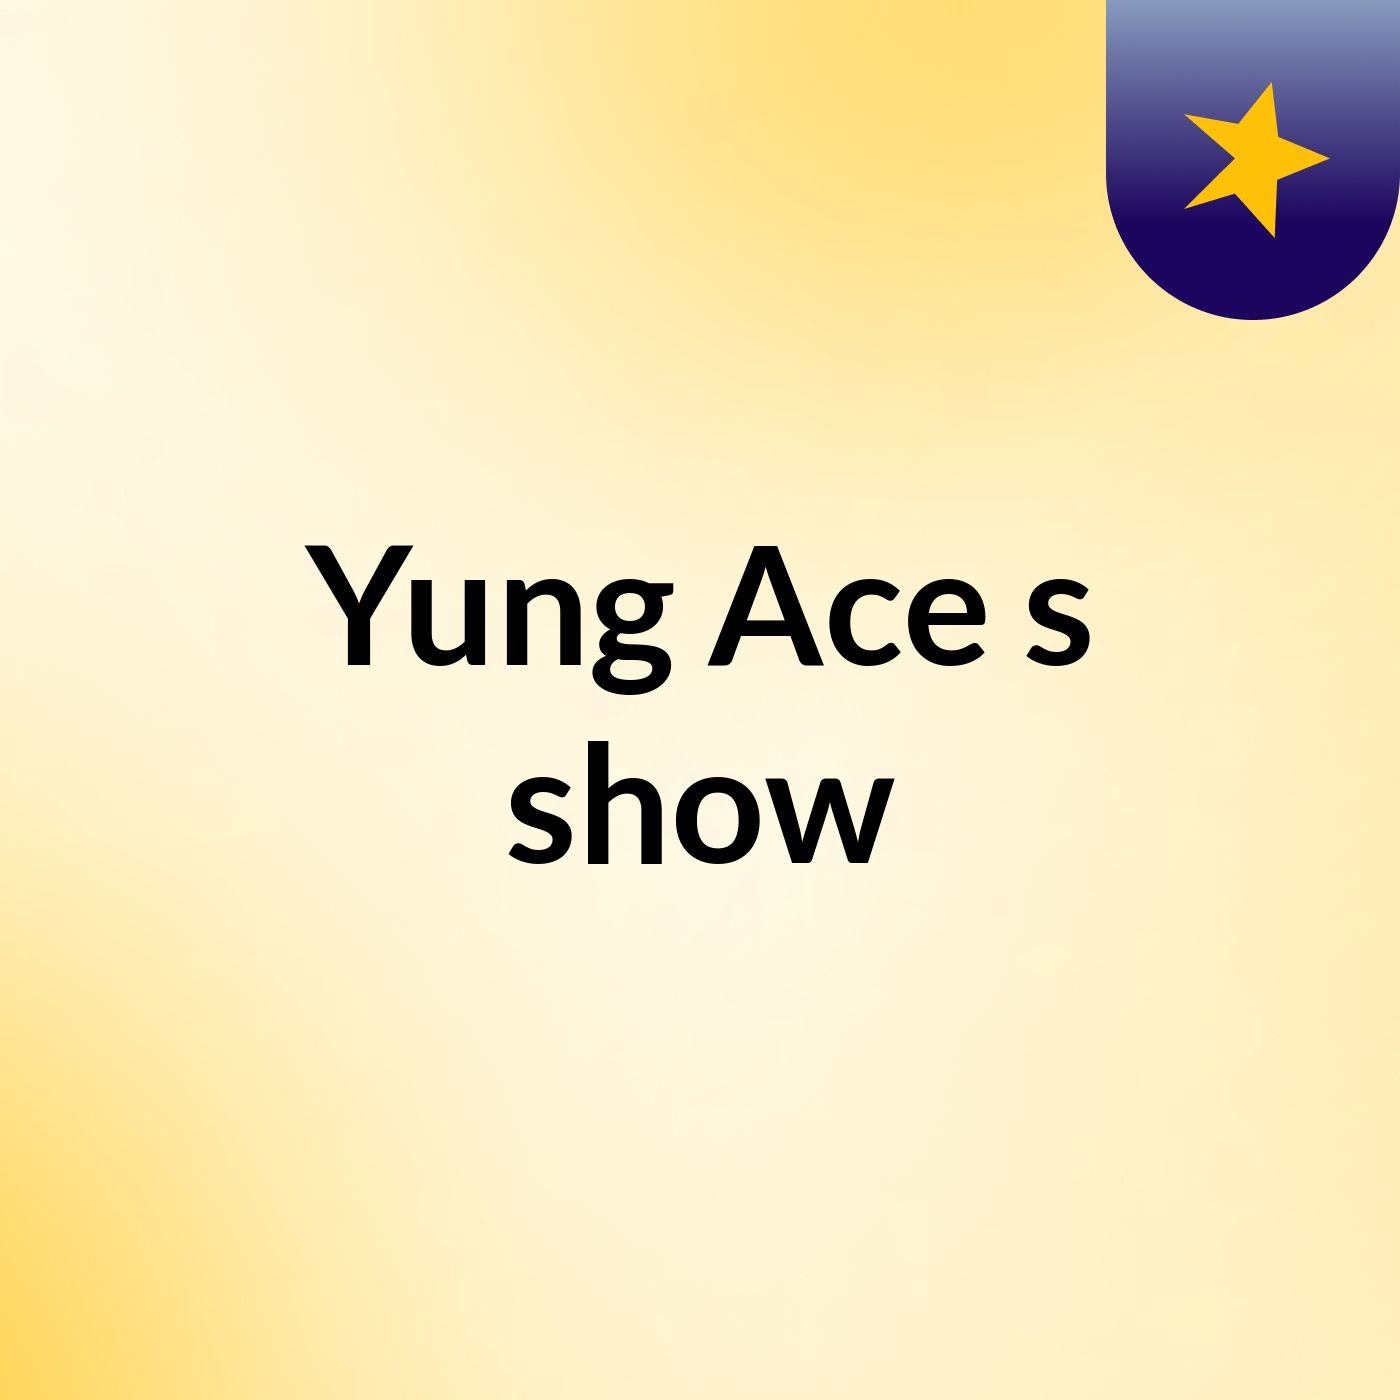 Yung Ace's show